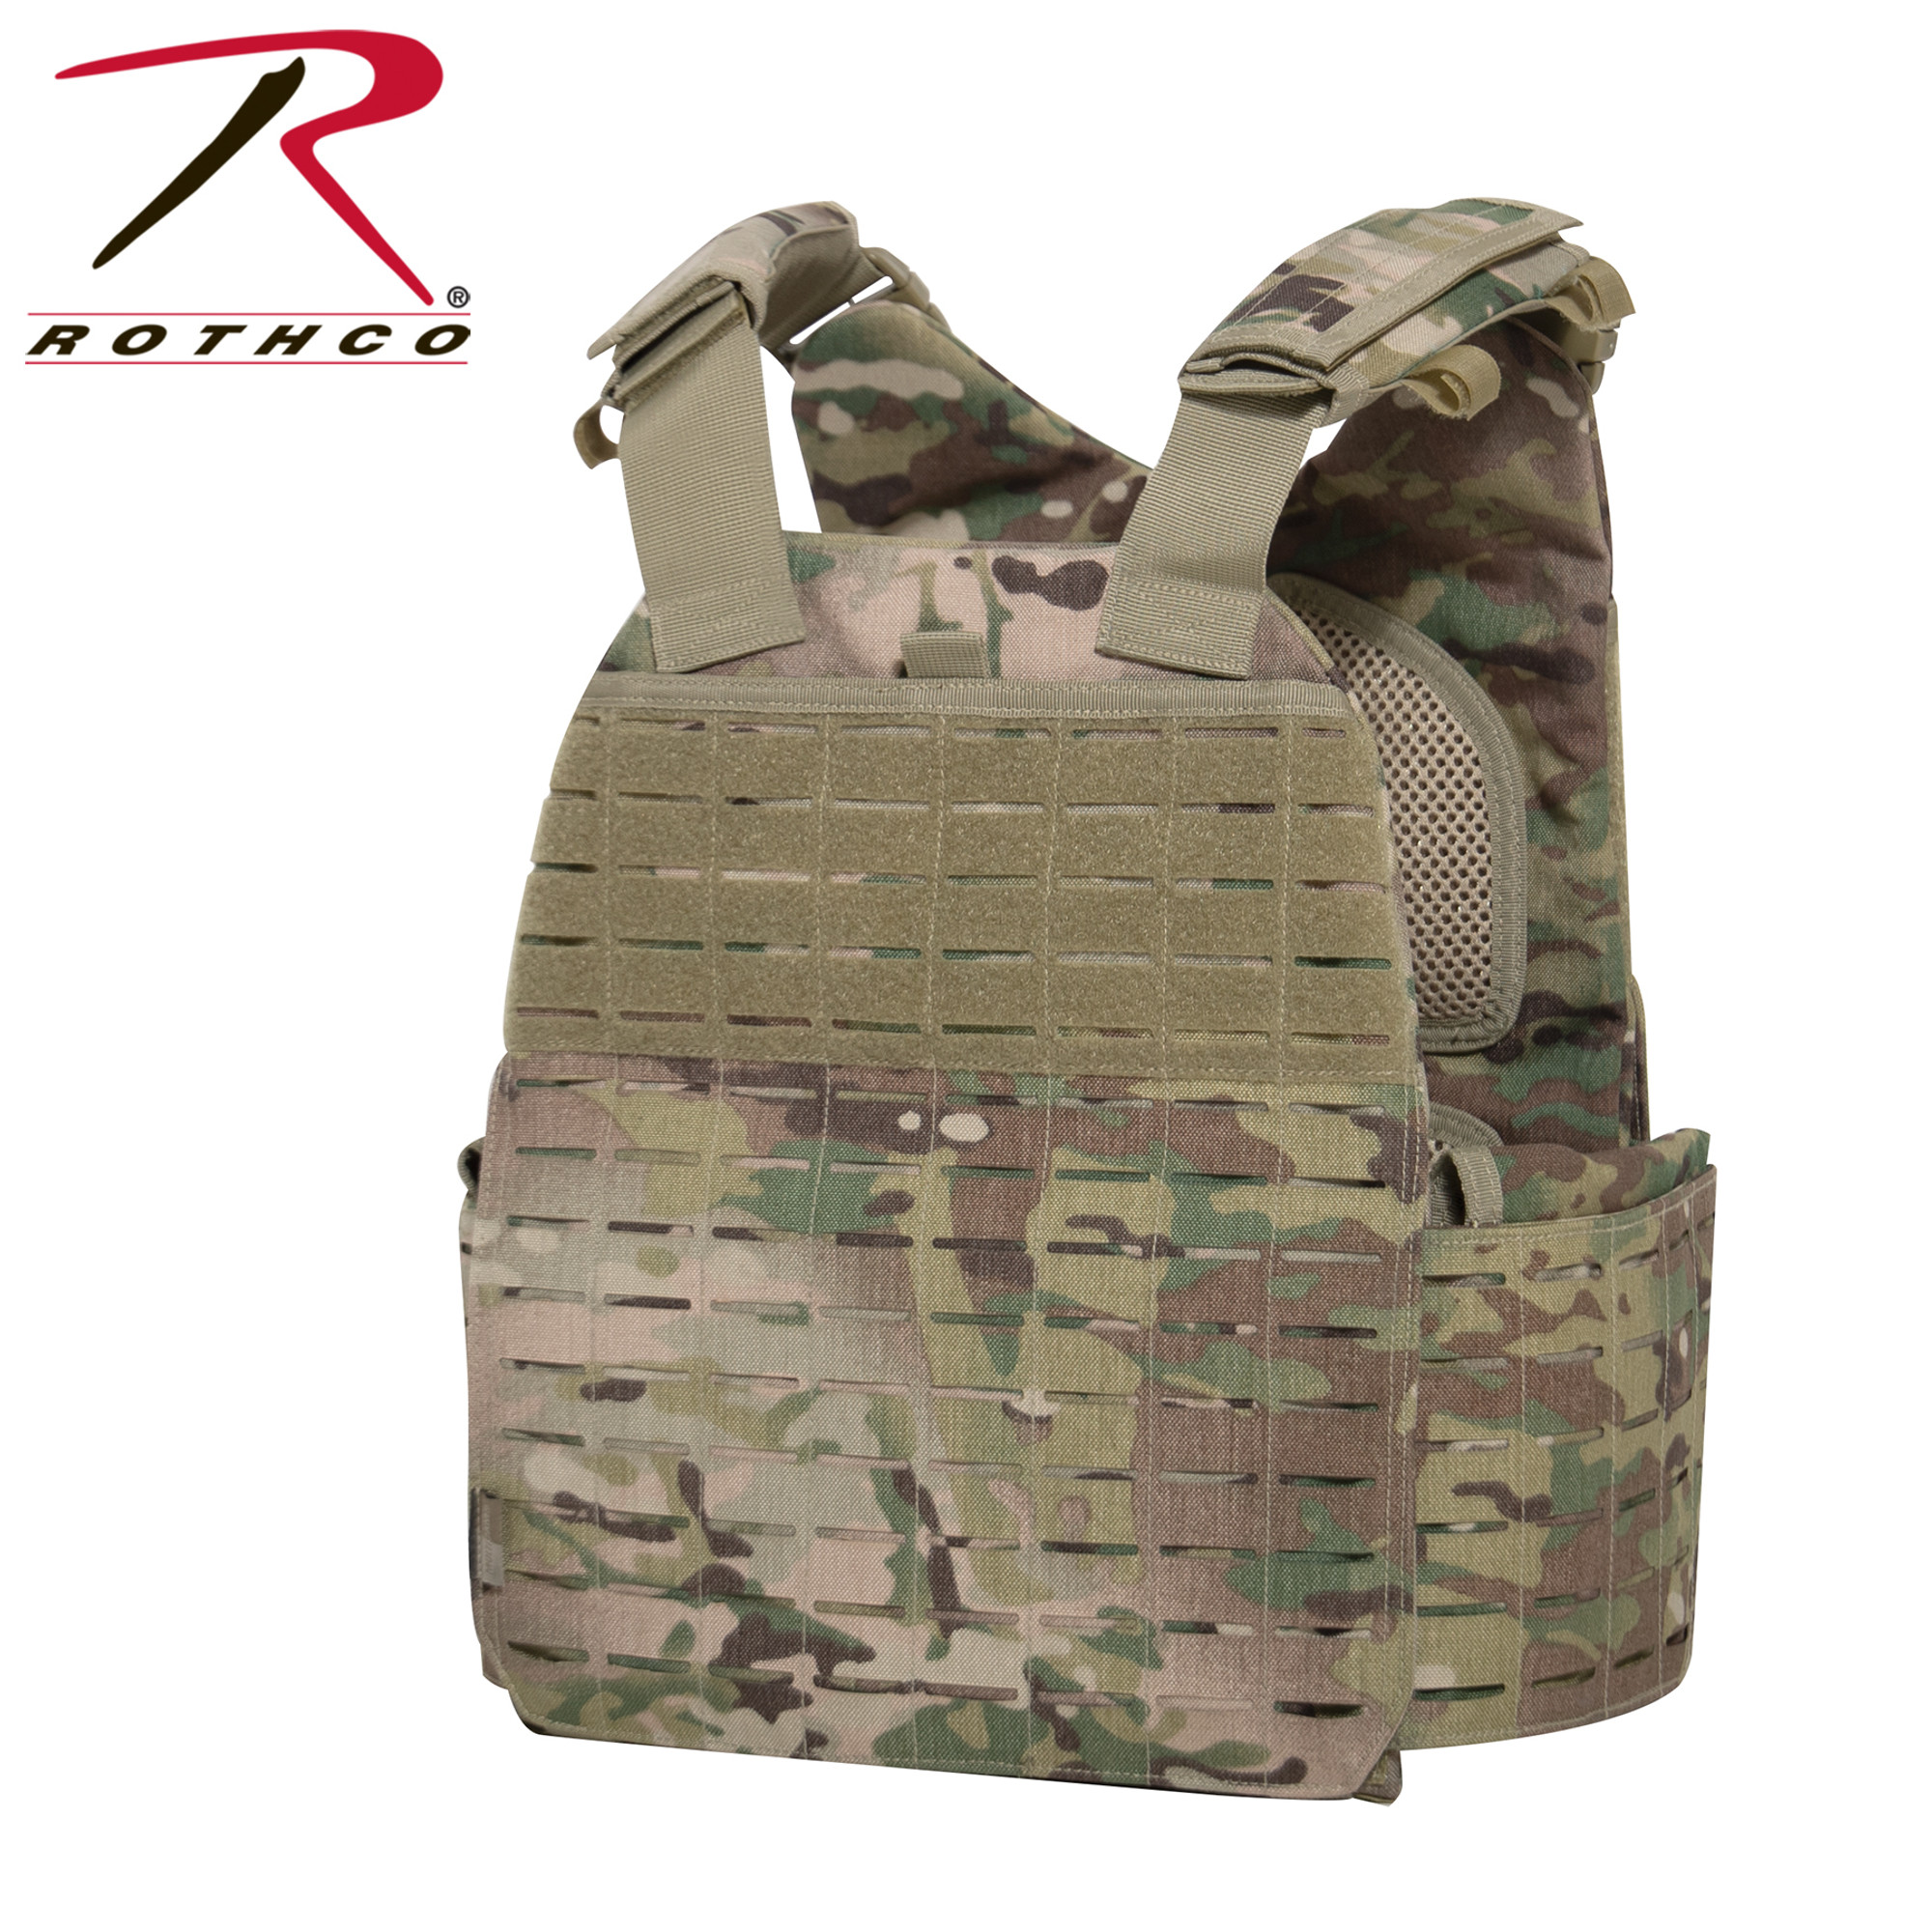 Rothco Laser Cut MOLLE Plate Carrier Vest - Multi-Cam